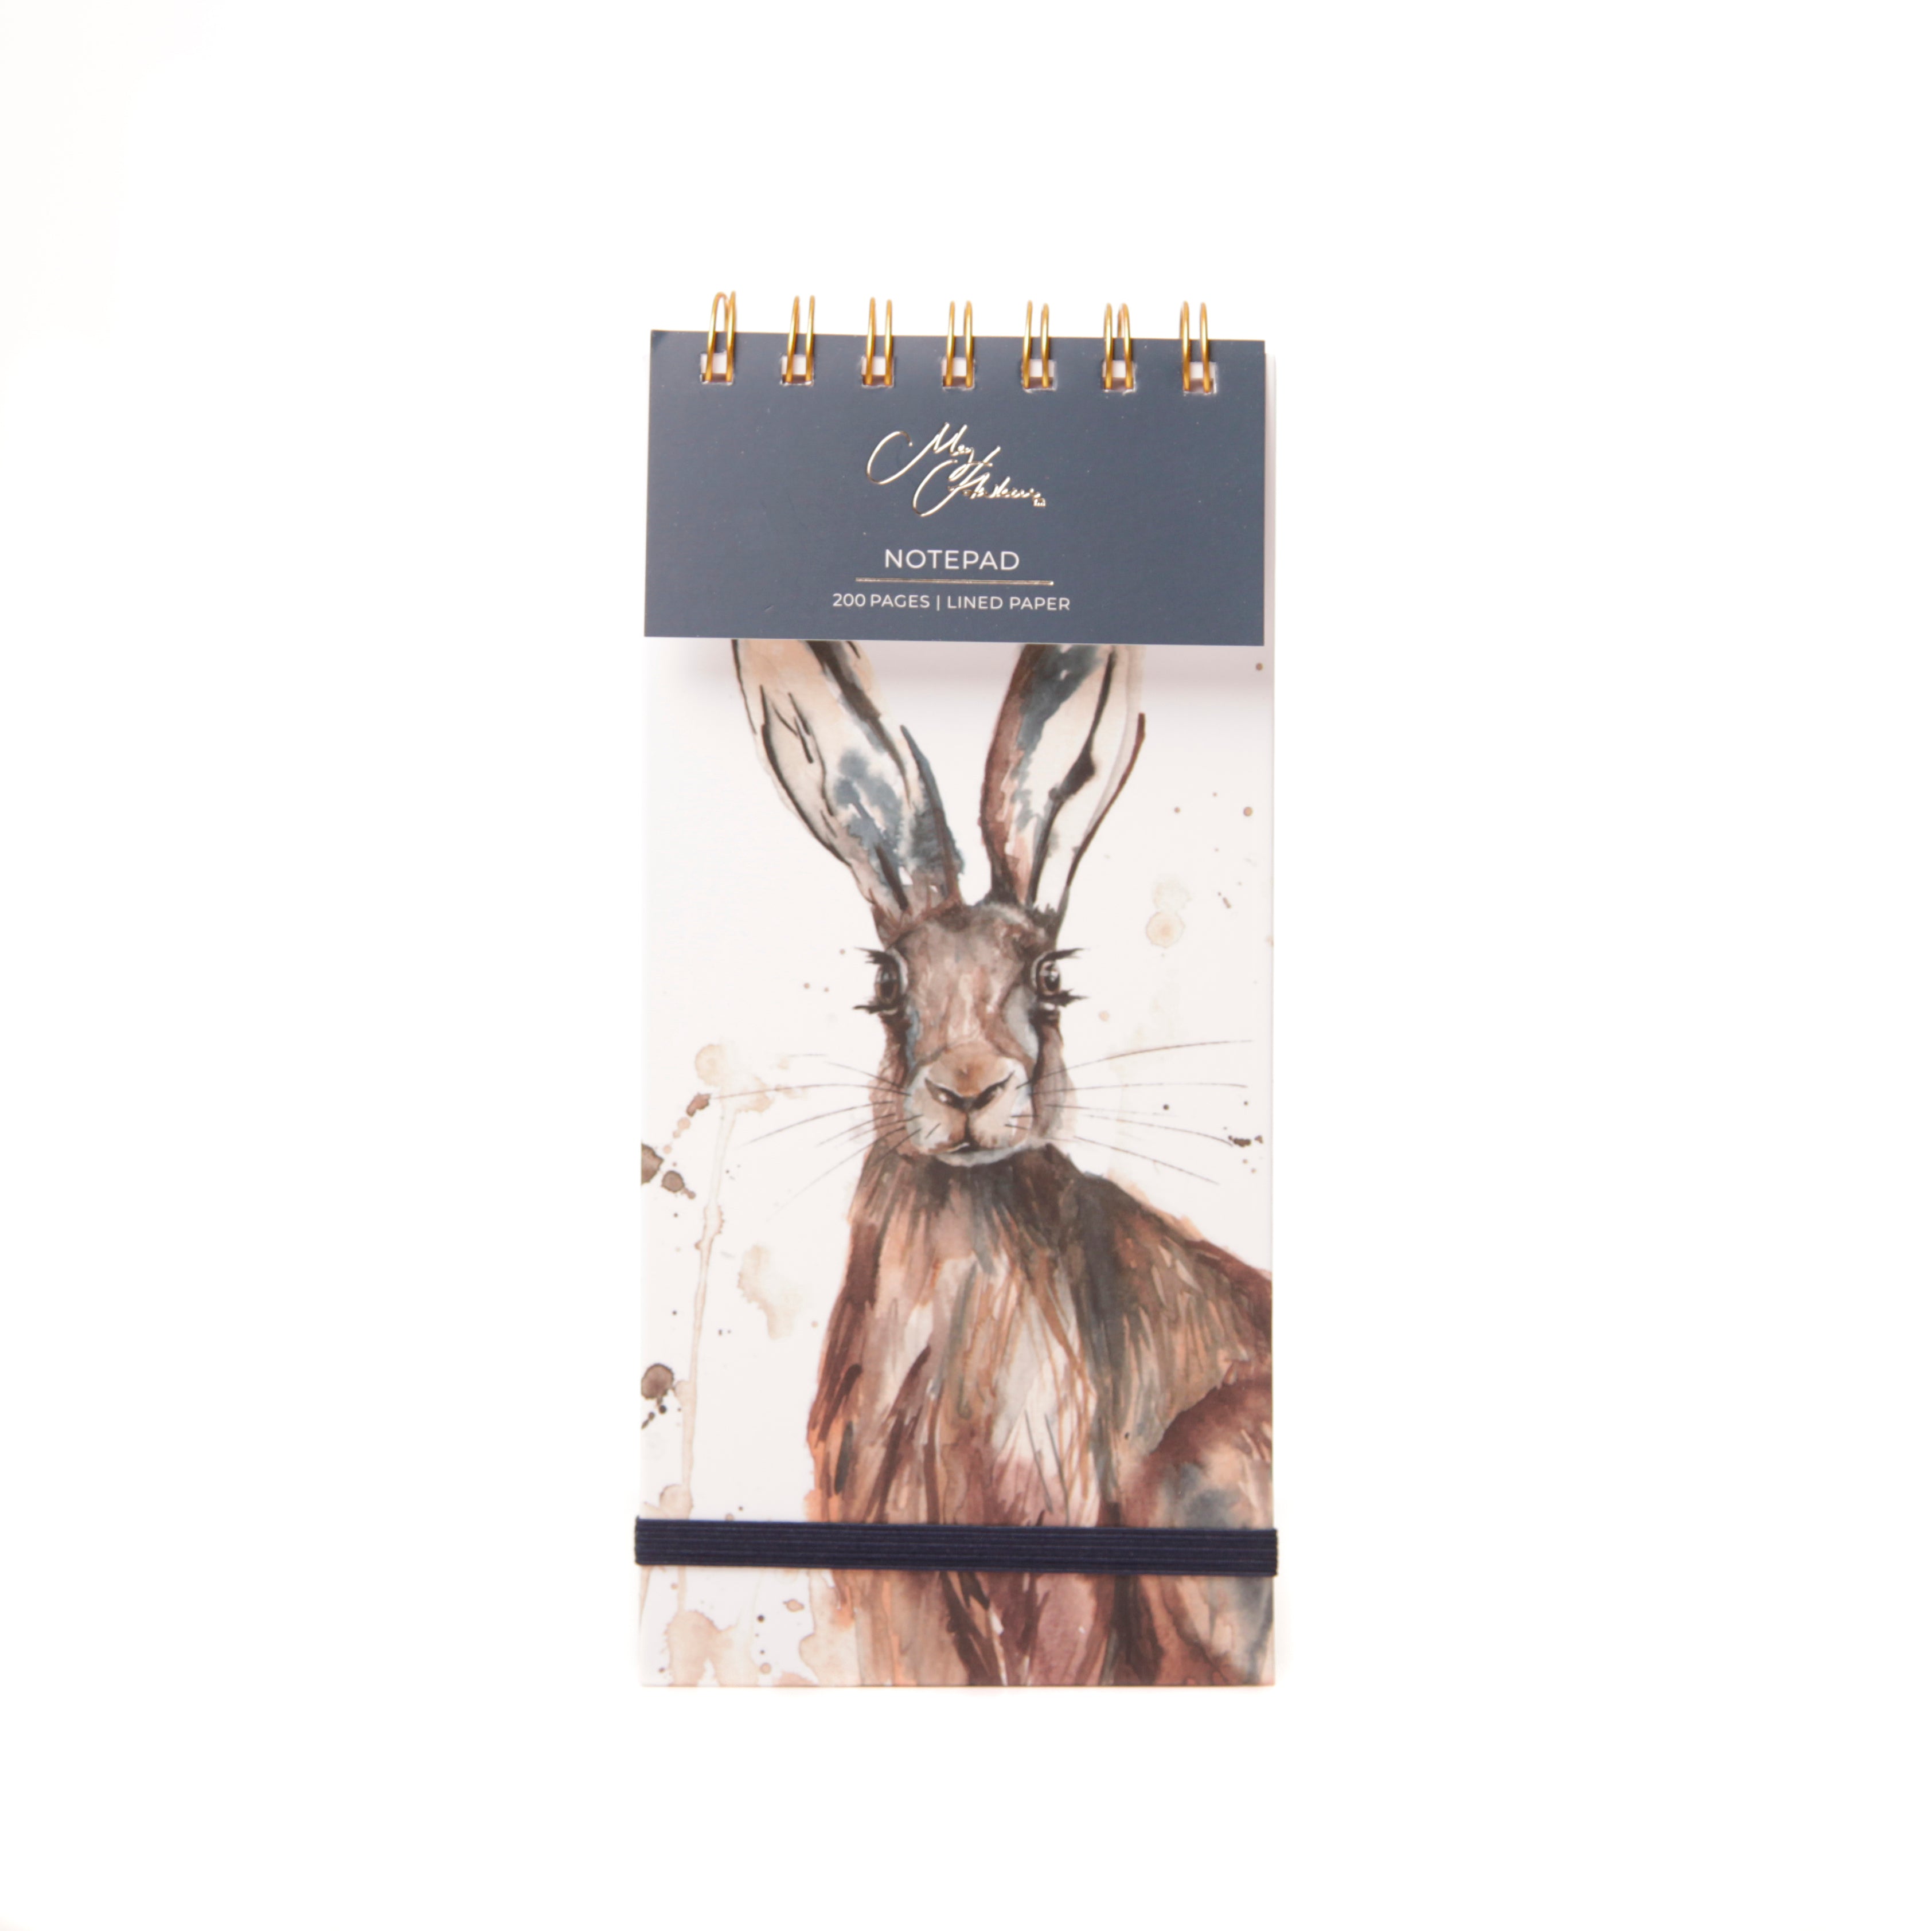 The Meadow Hare Watercolour Design Notepad